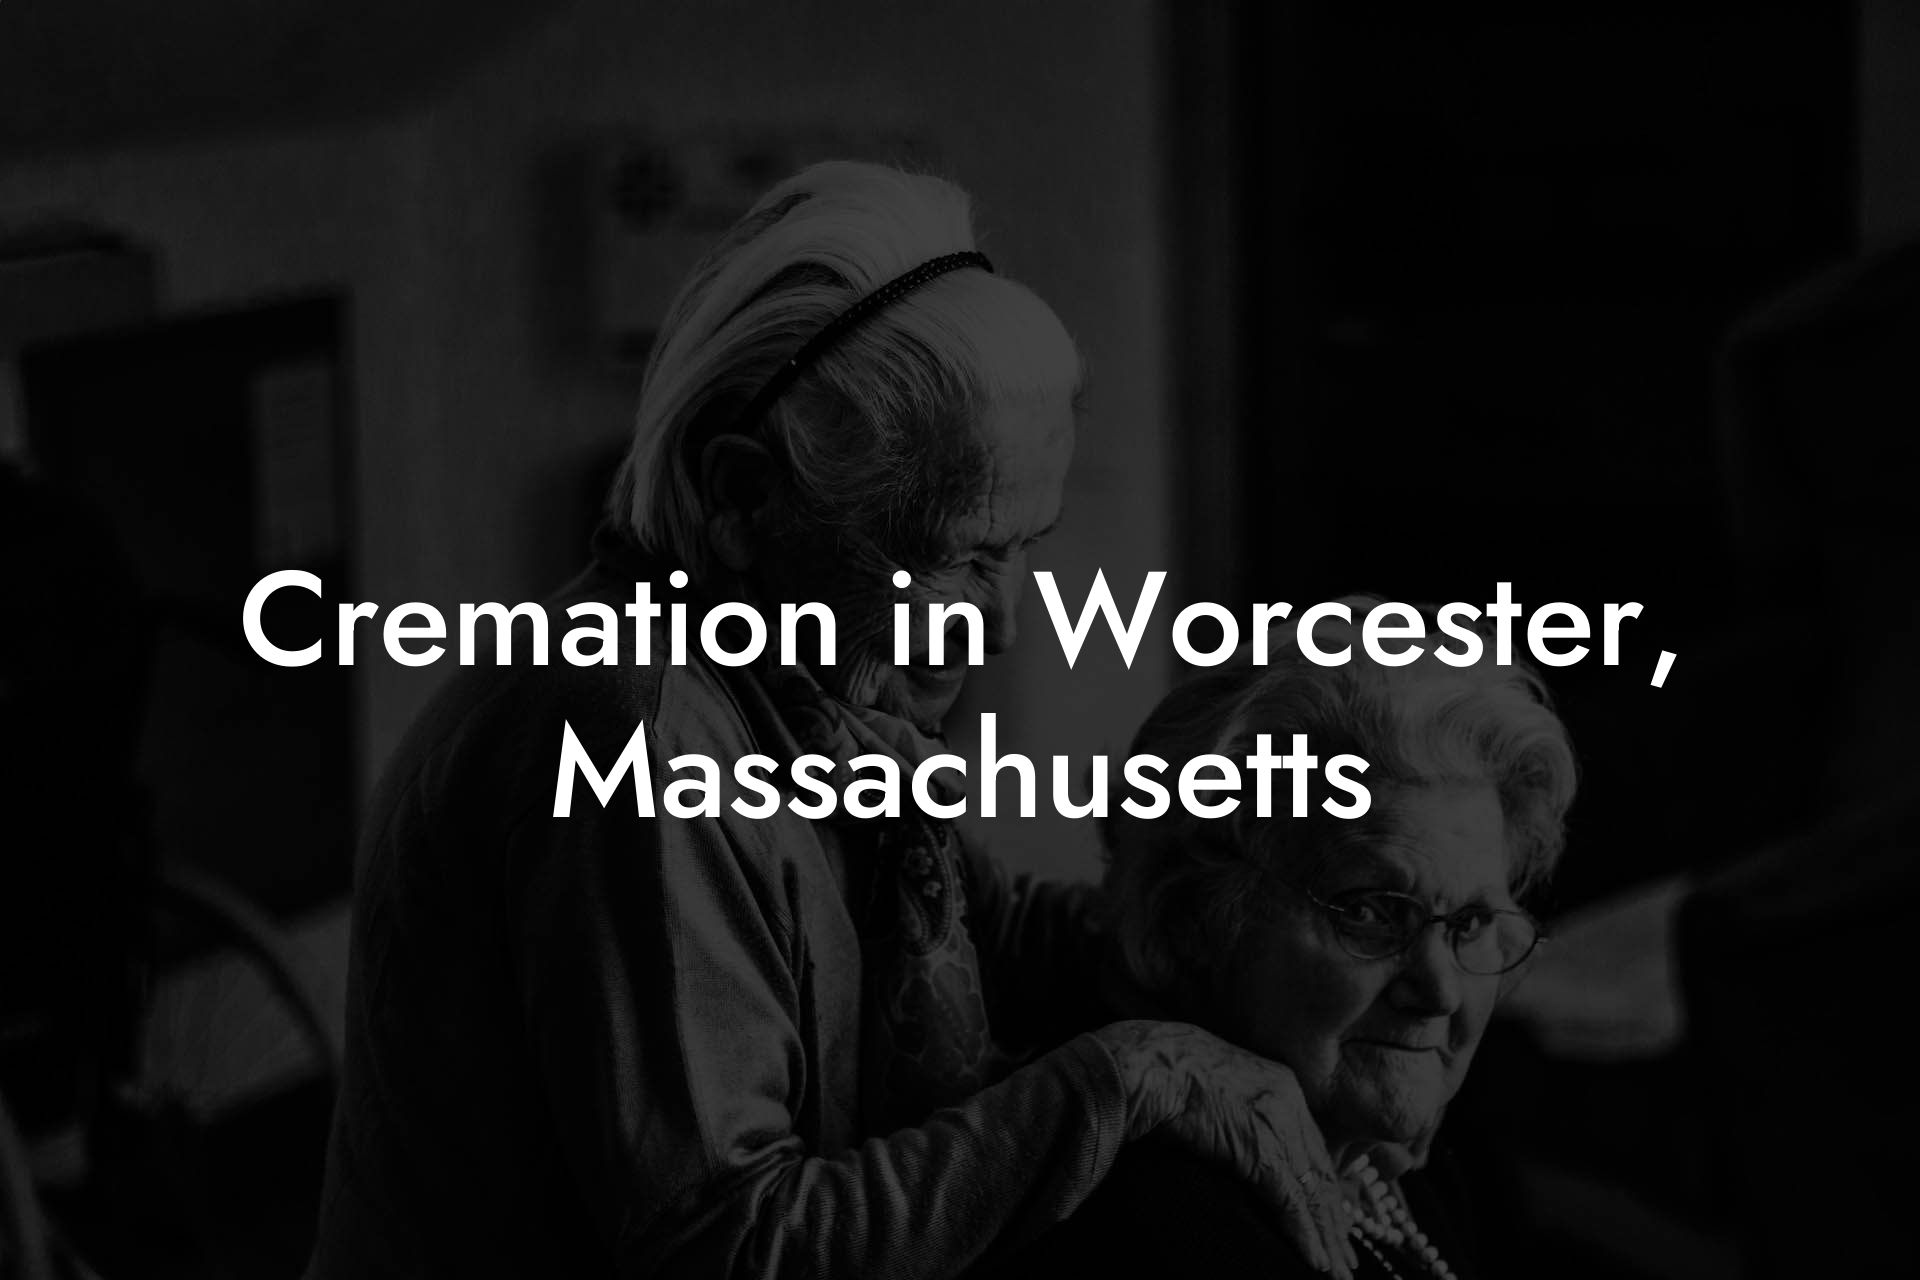 Cremation in Worcester, Massachusetts